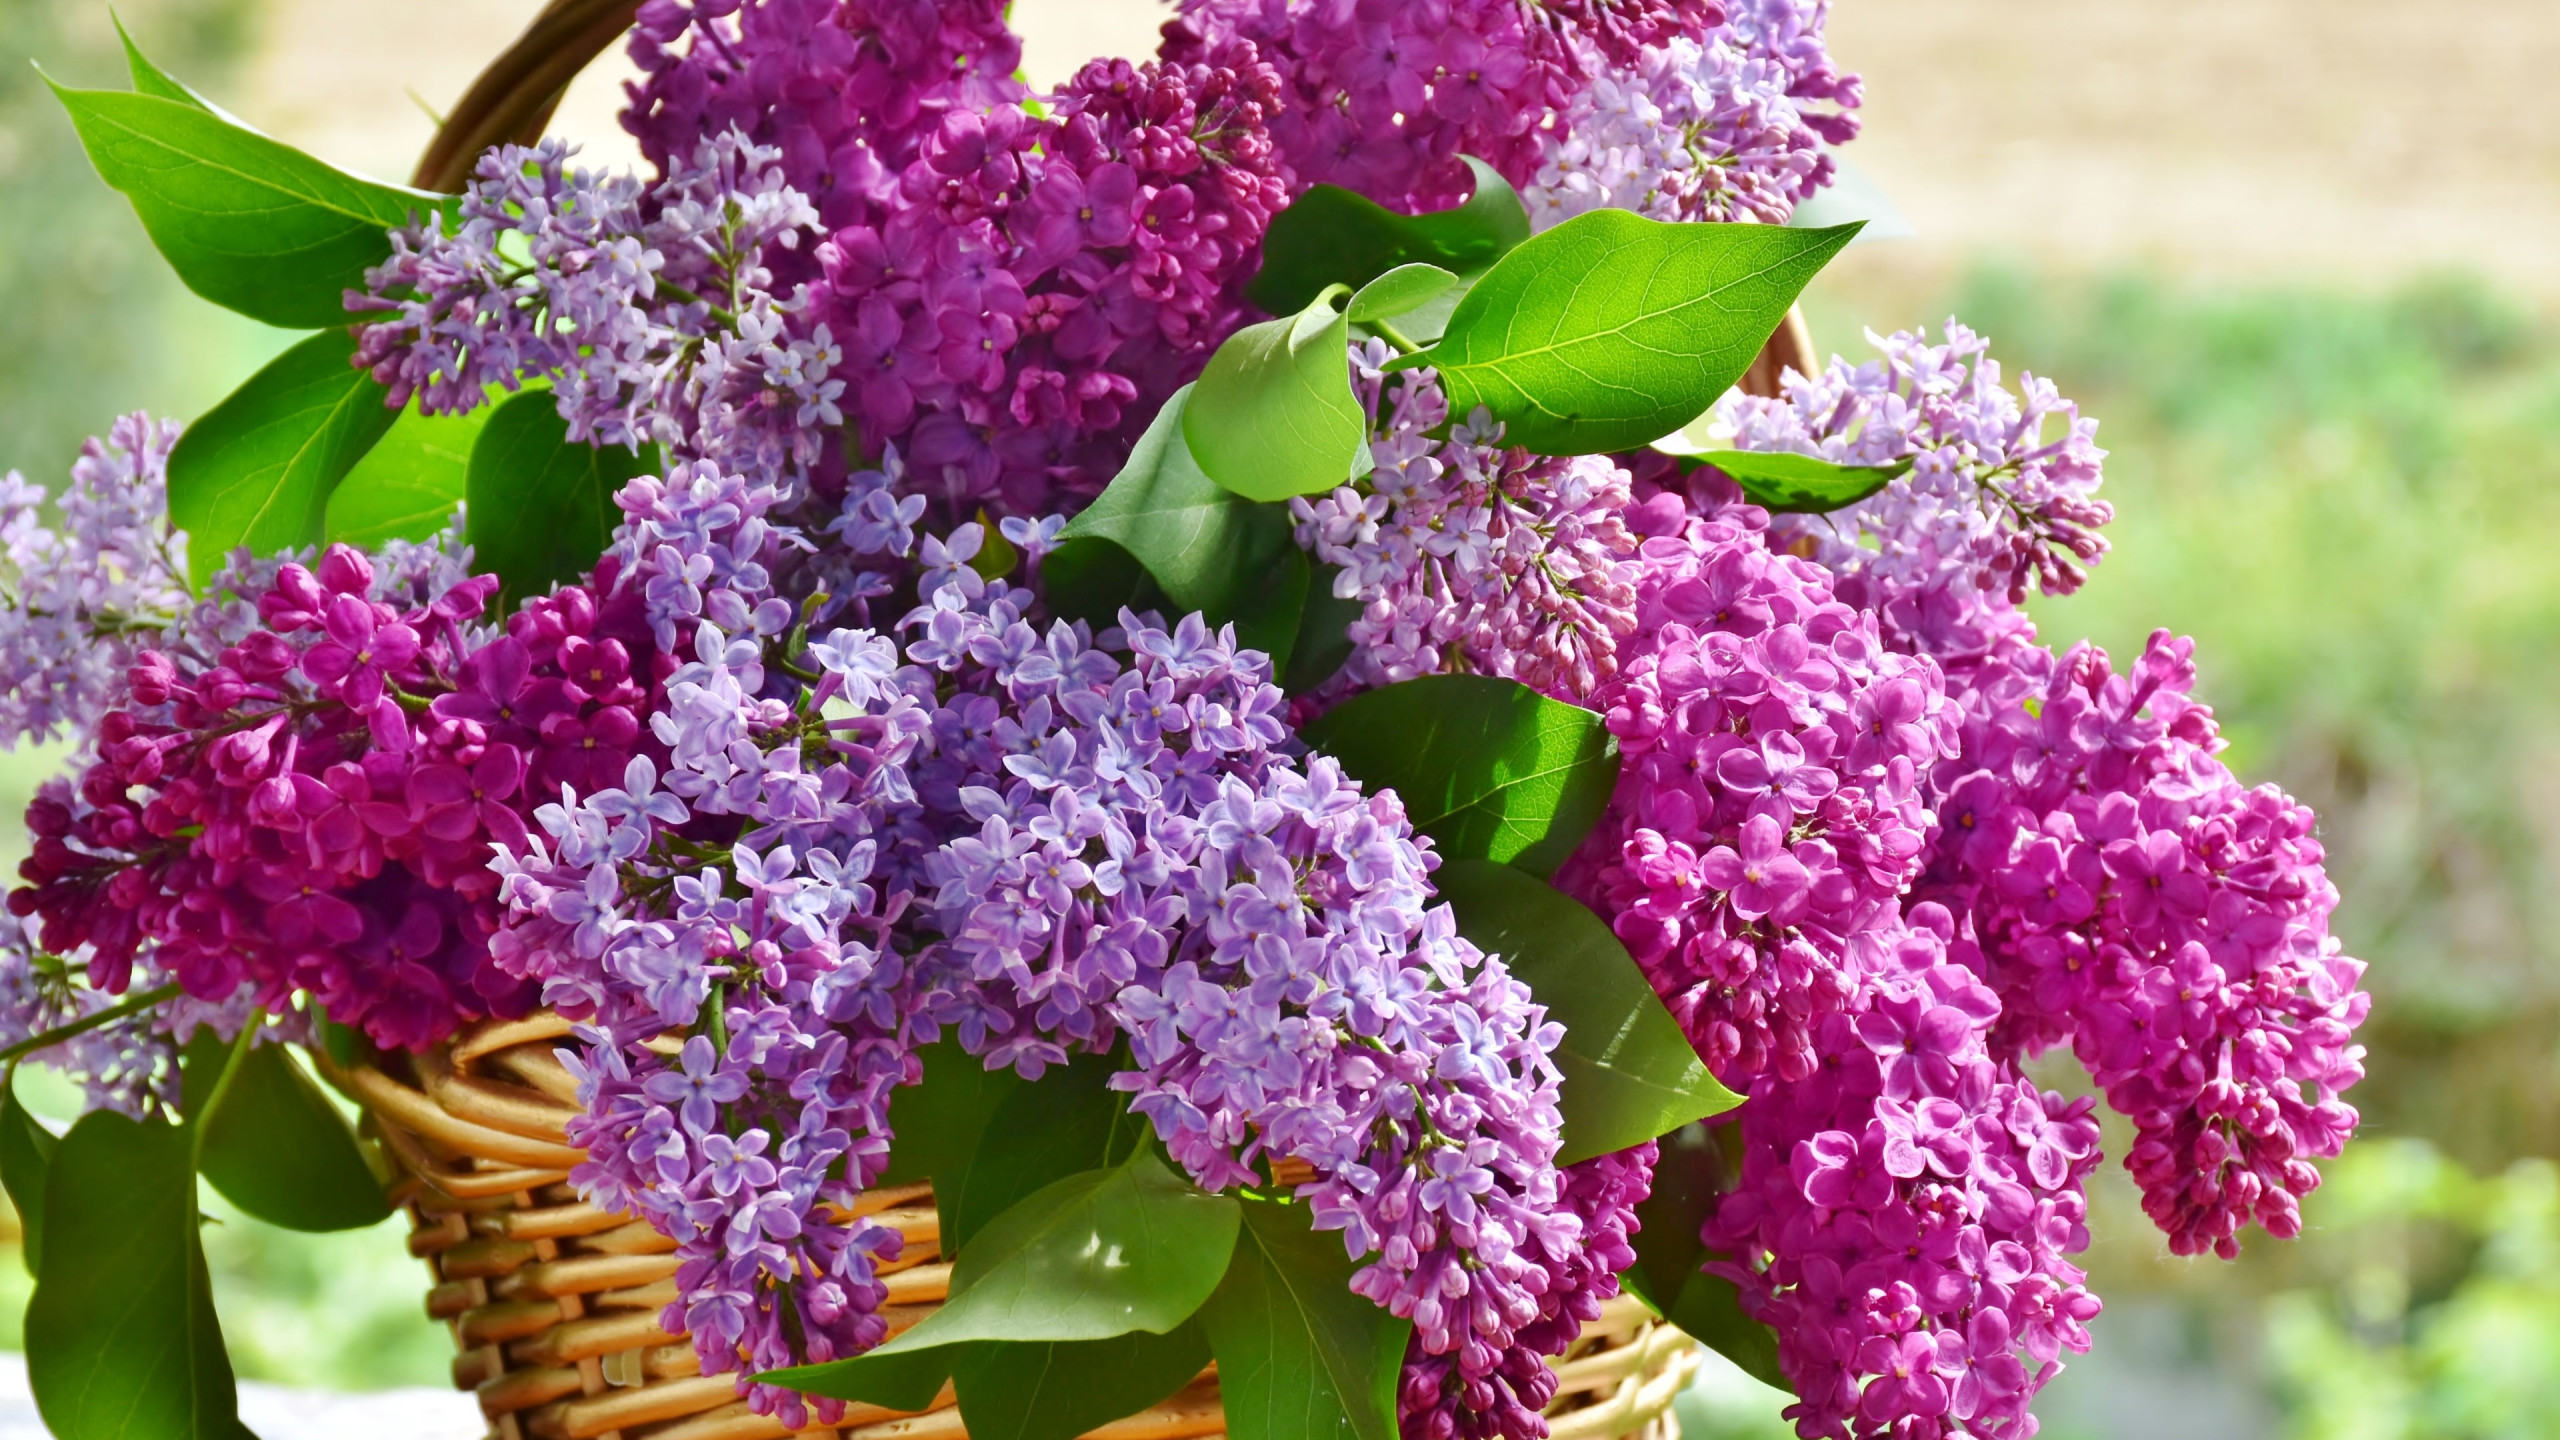 Best basket with lilac flowers wallpaper 2560x1440